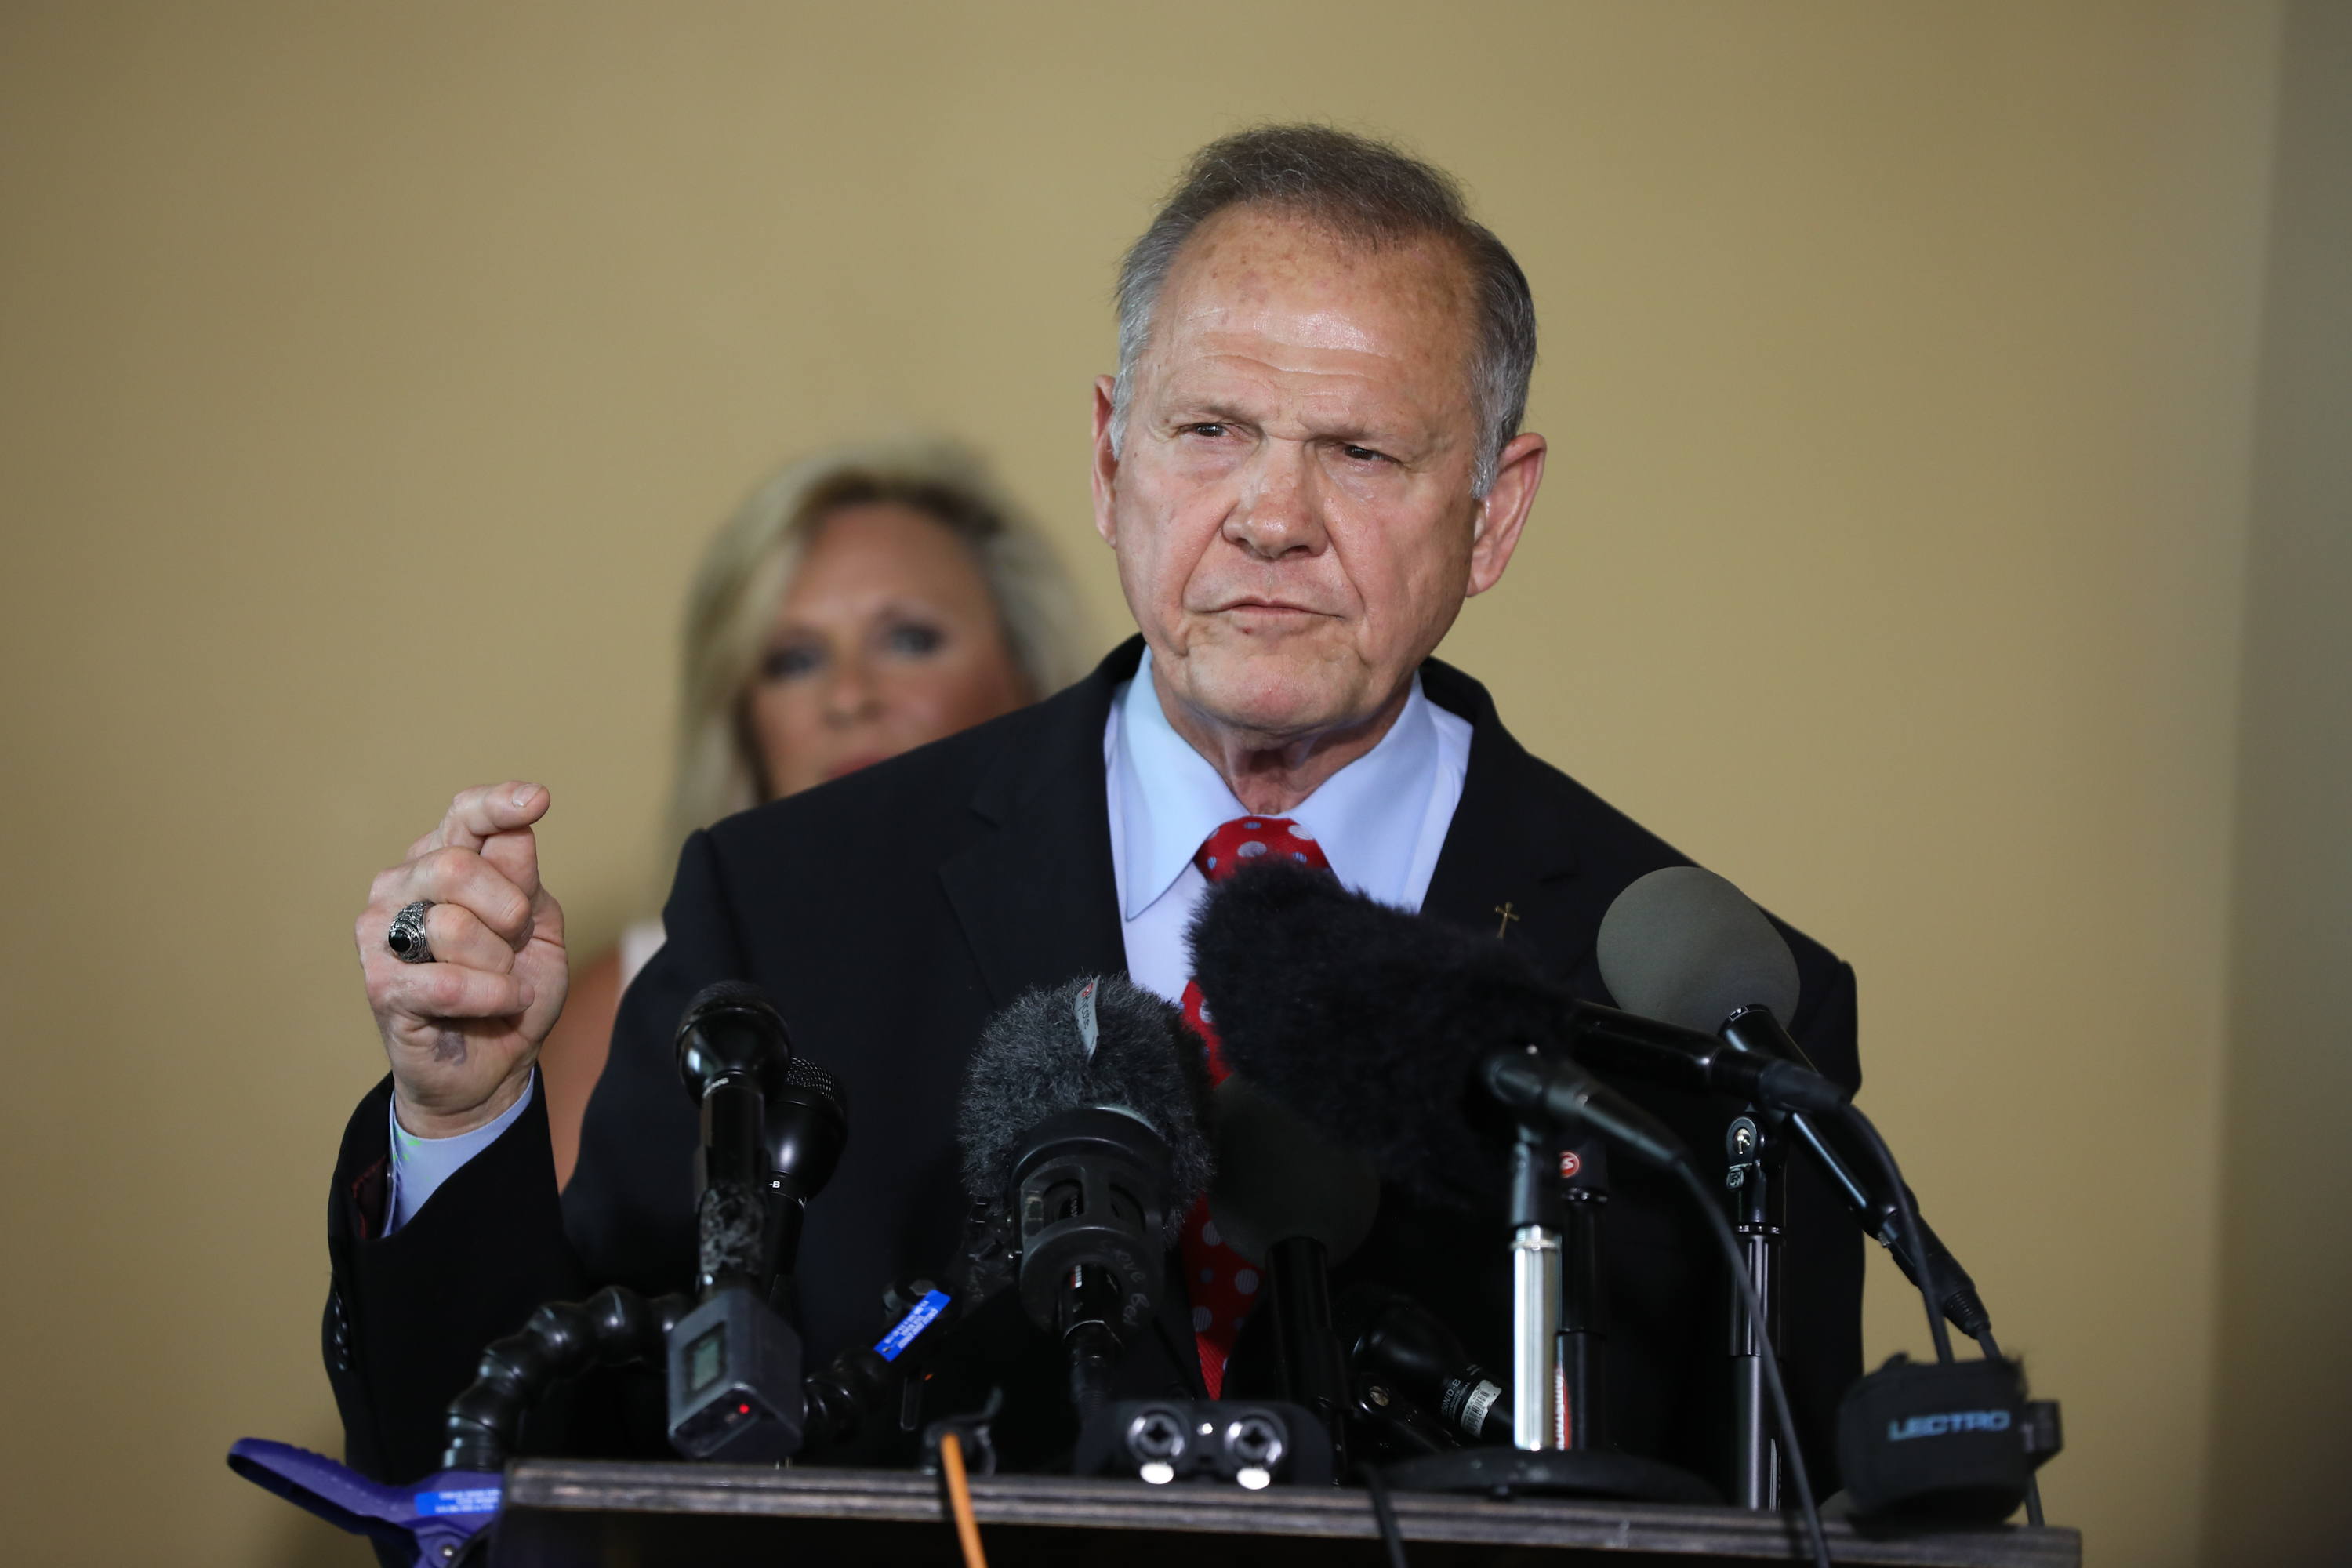 Roy Moore announces his plans to run for U.S. Senate in 2020 on June 20, 2019 